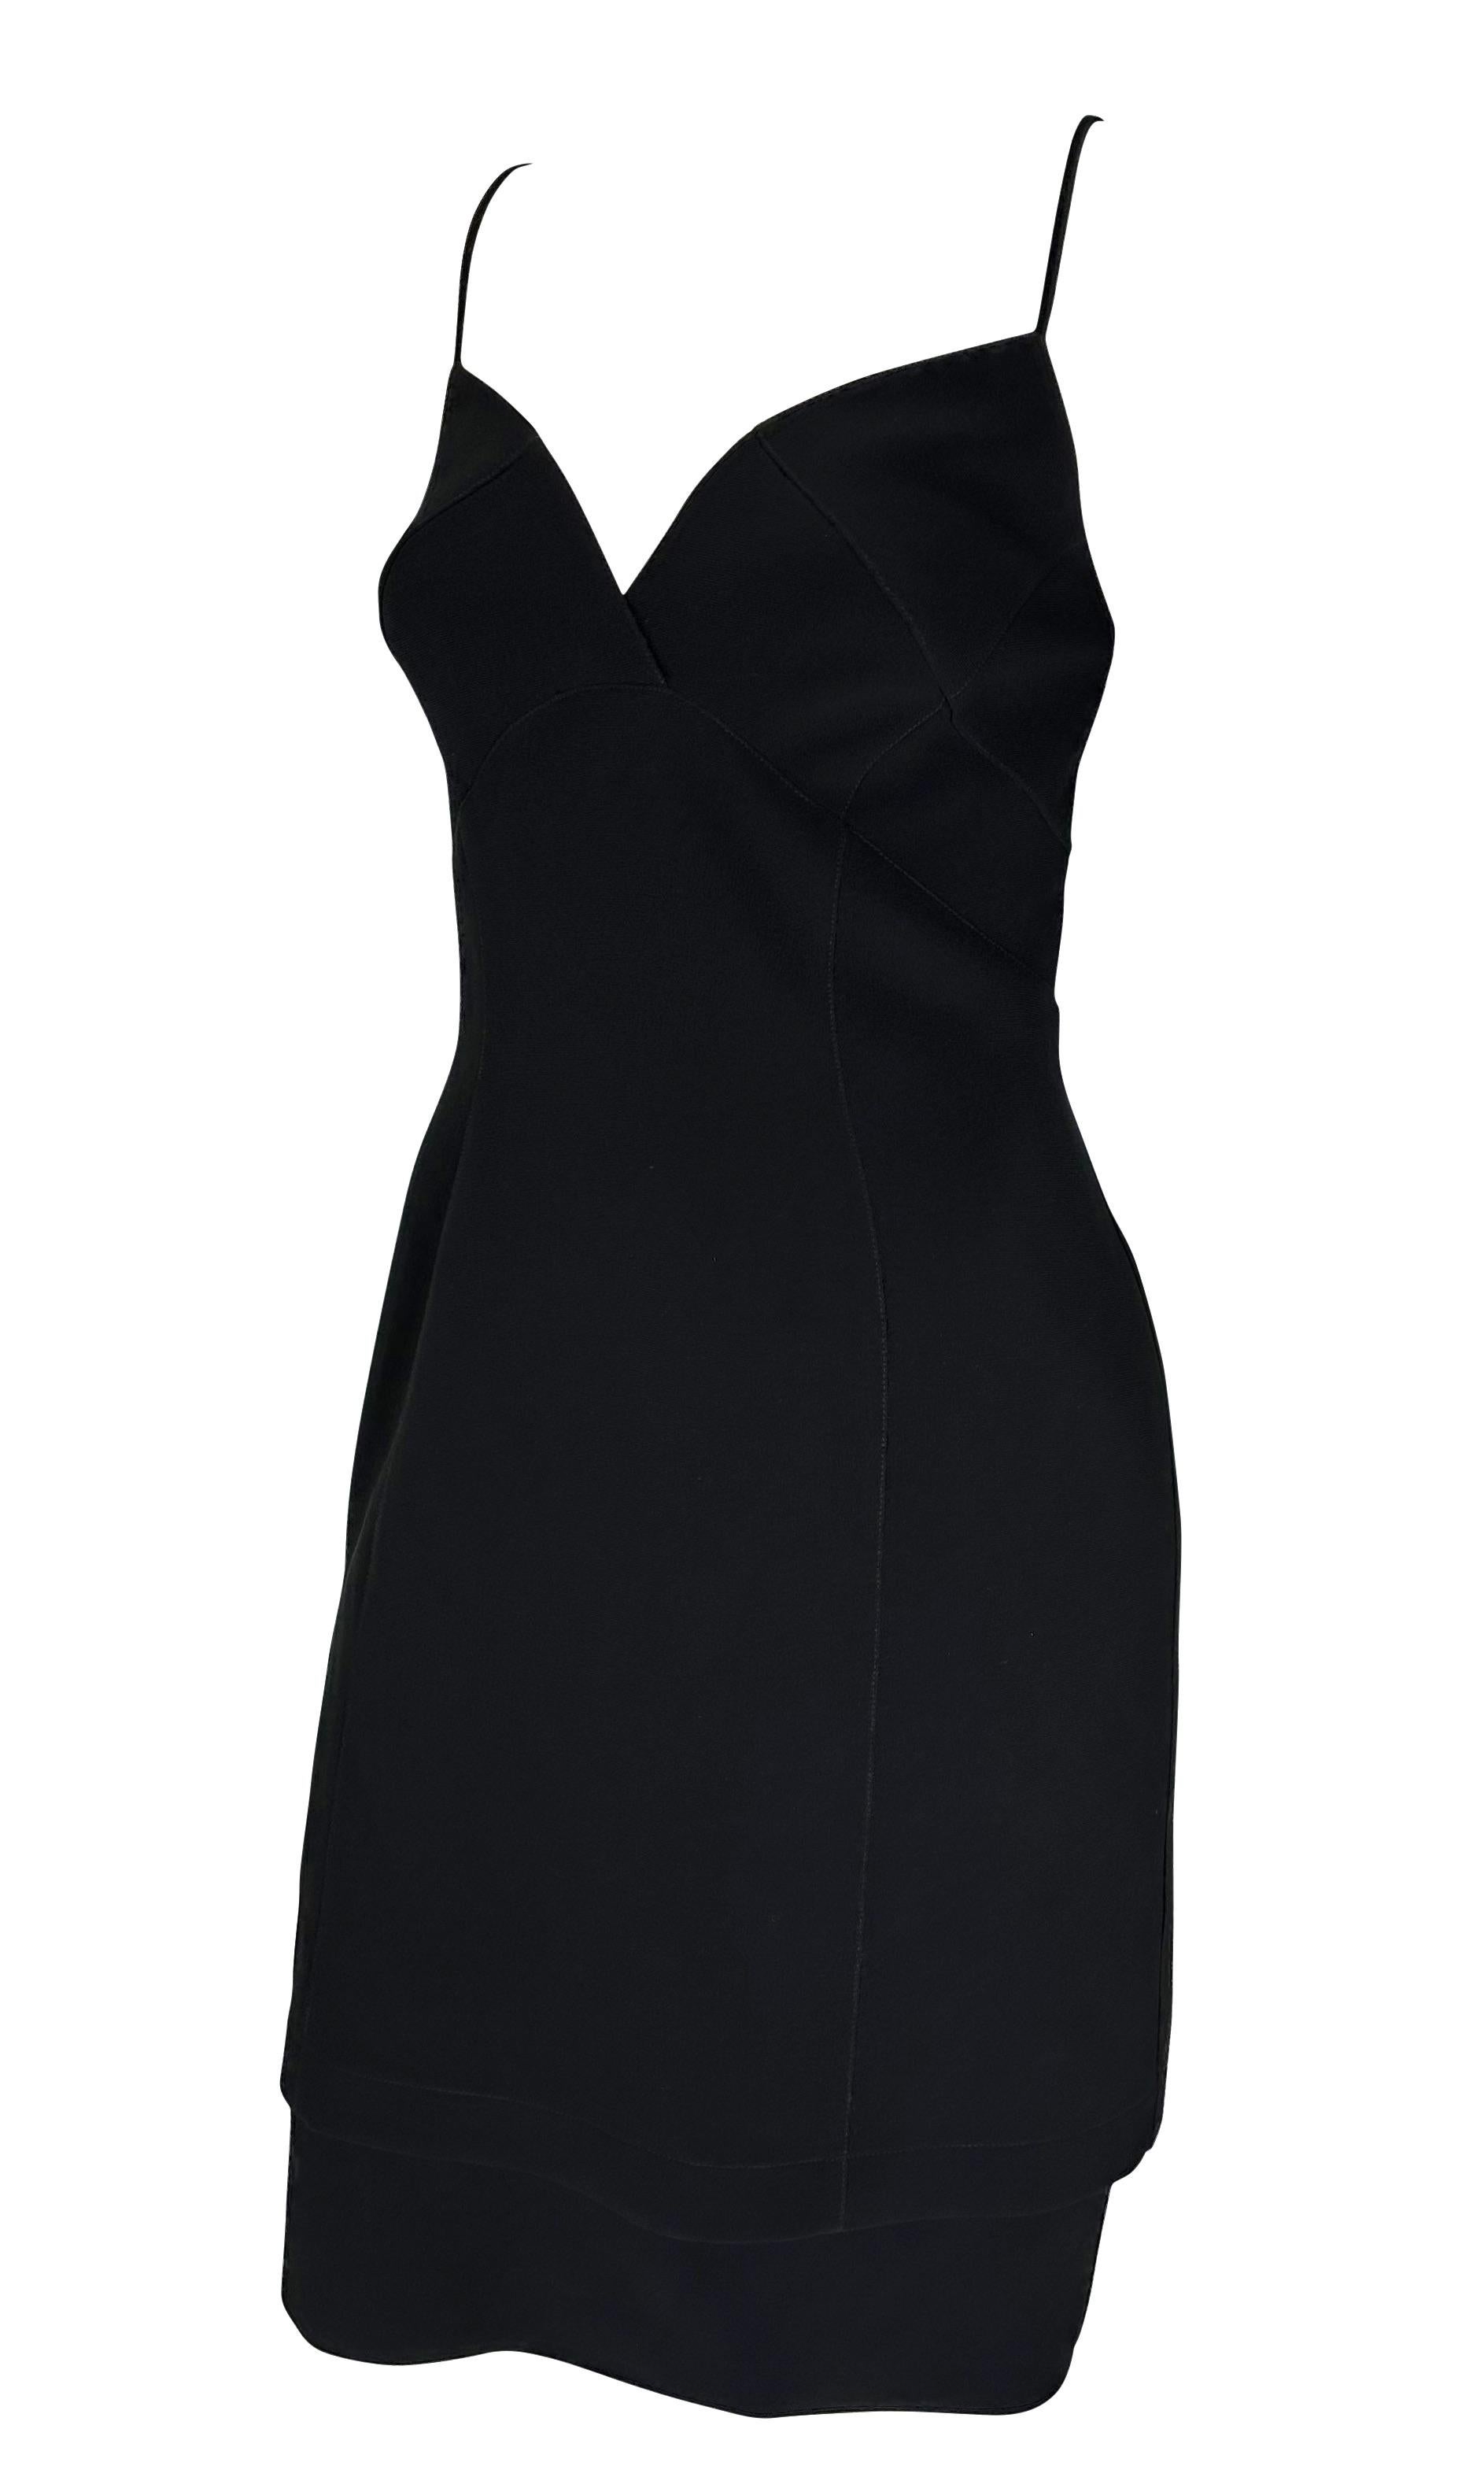 Presenting a beautiful black Thierry Mugler cocktail dress, designed by Manfred Mugler. This simple and oh-so-sexy dress features a sweetheart neckline, spaghetti straps, and a layered hem. The perfect little Thierry Mugler black dress, this